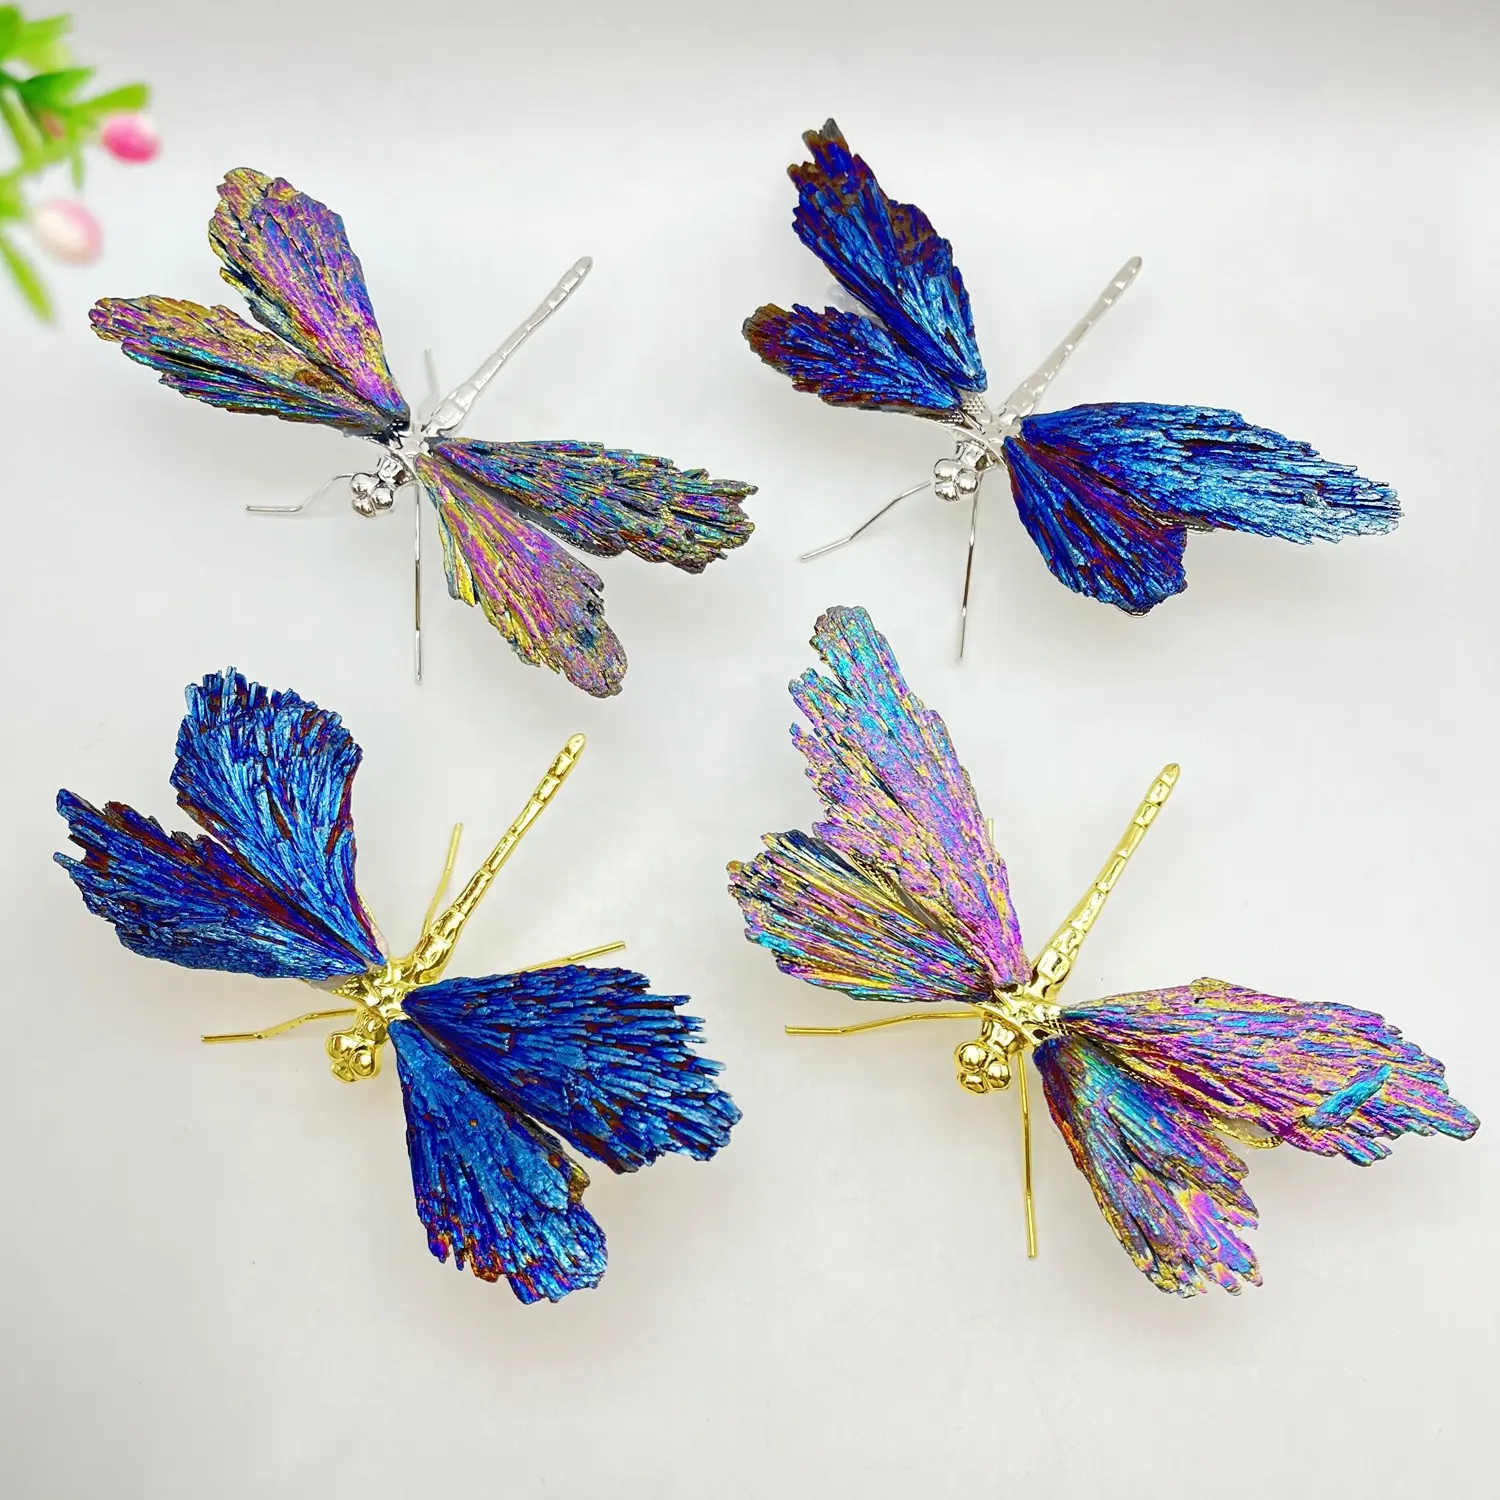 New arrivals healing crystals crafts ornaments natural rainbow aura black tourmaline crystals butterfly for home decoration